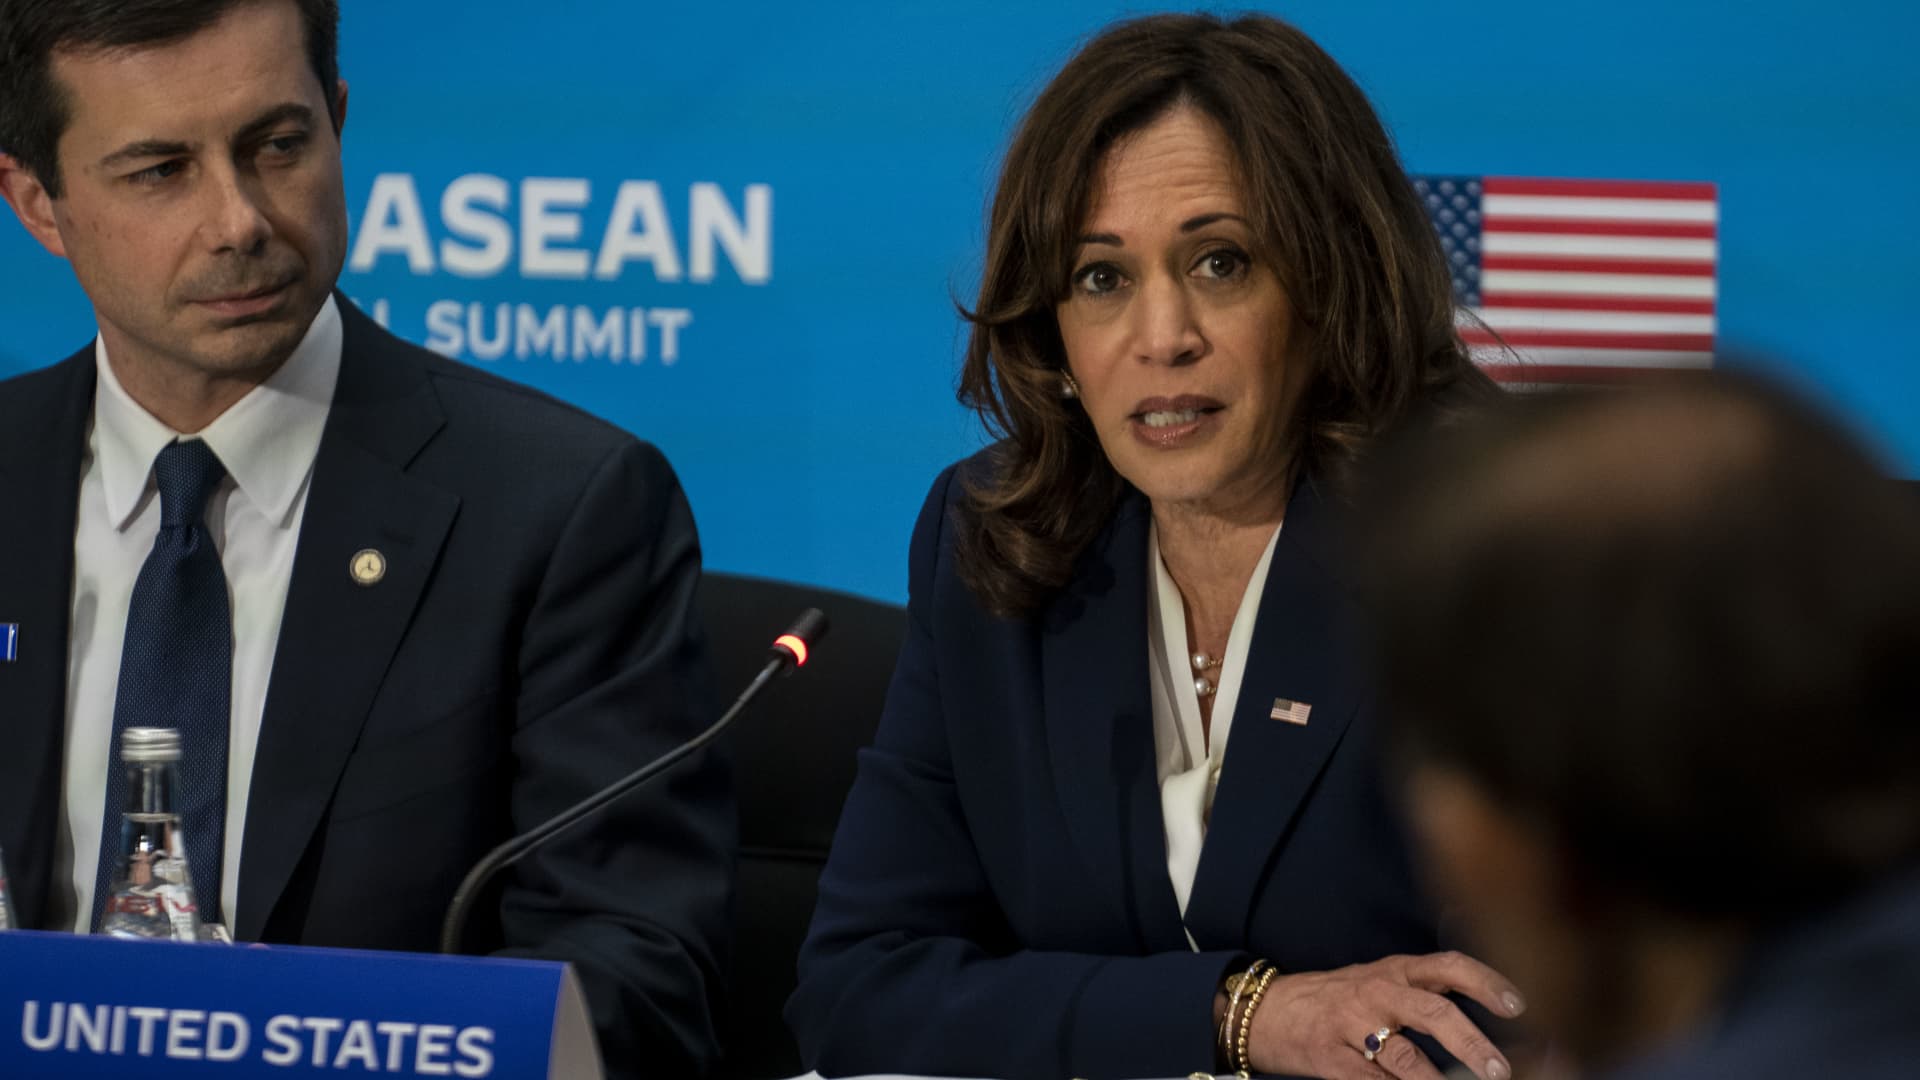 Vice President Harris to attend the Southeast Asian nations summit